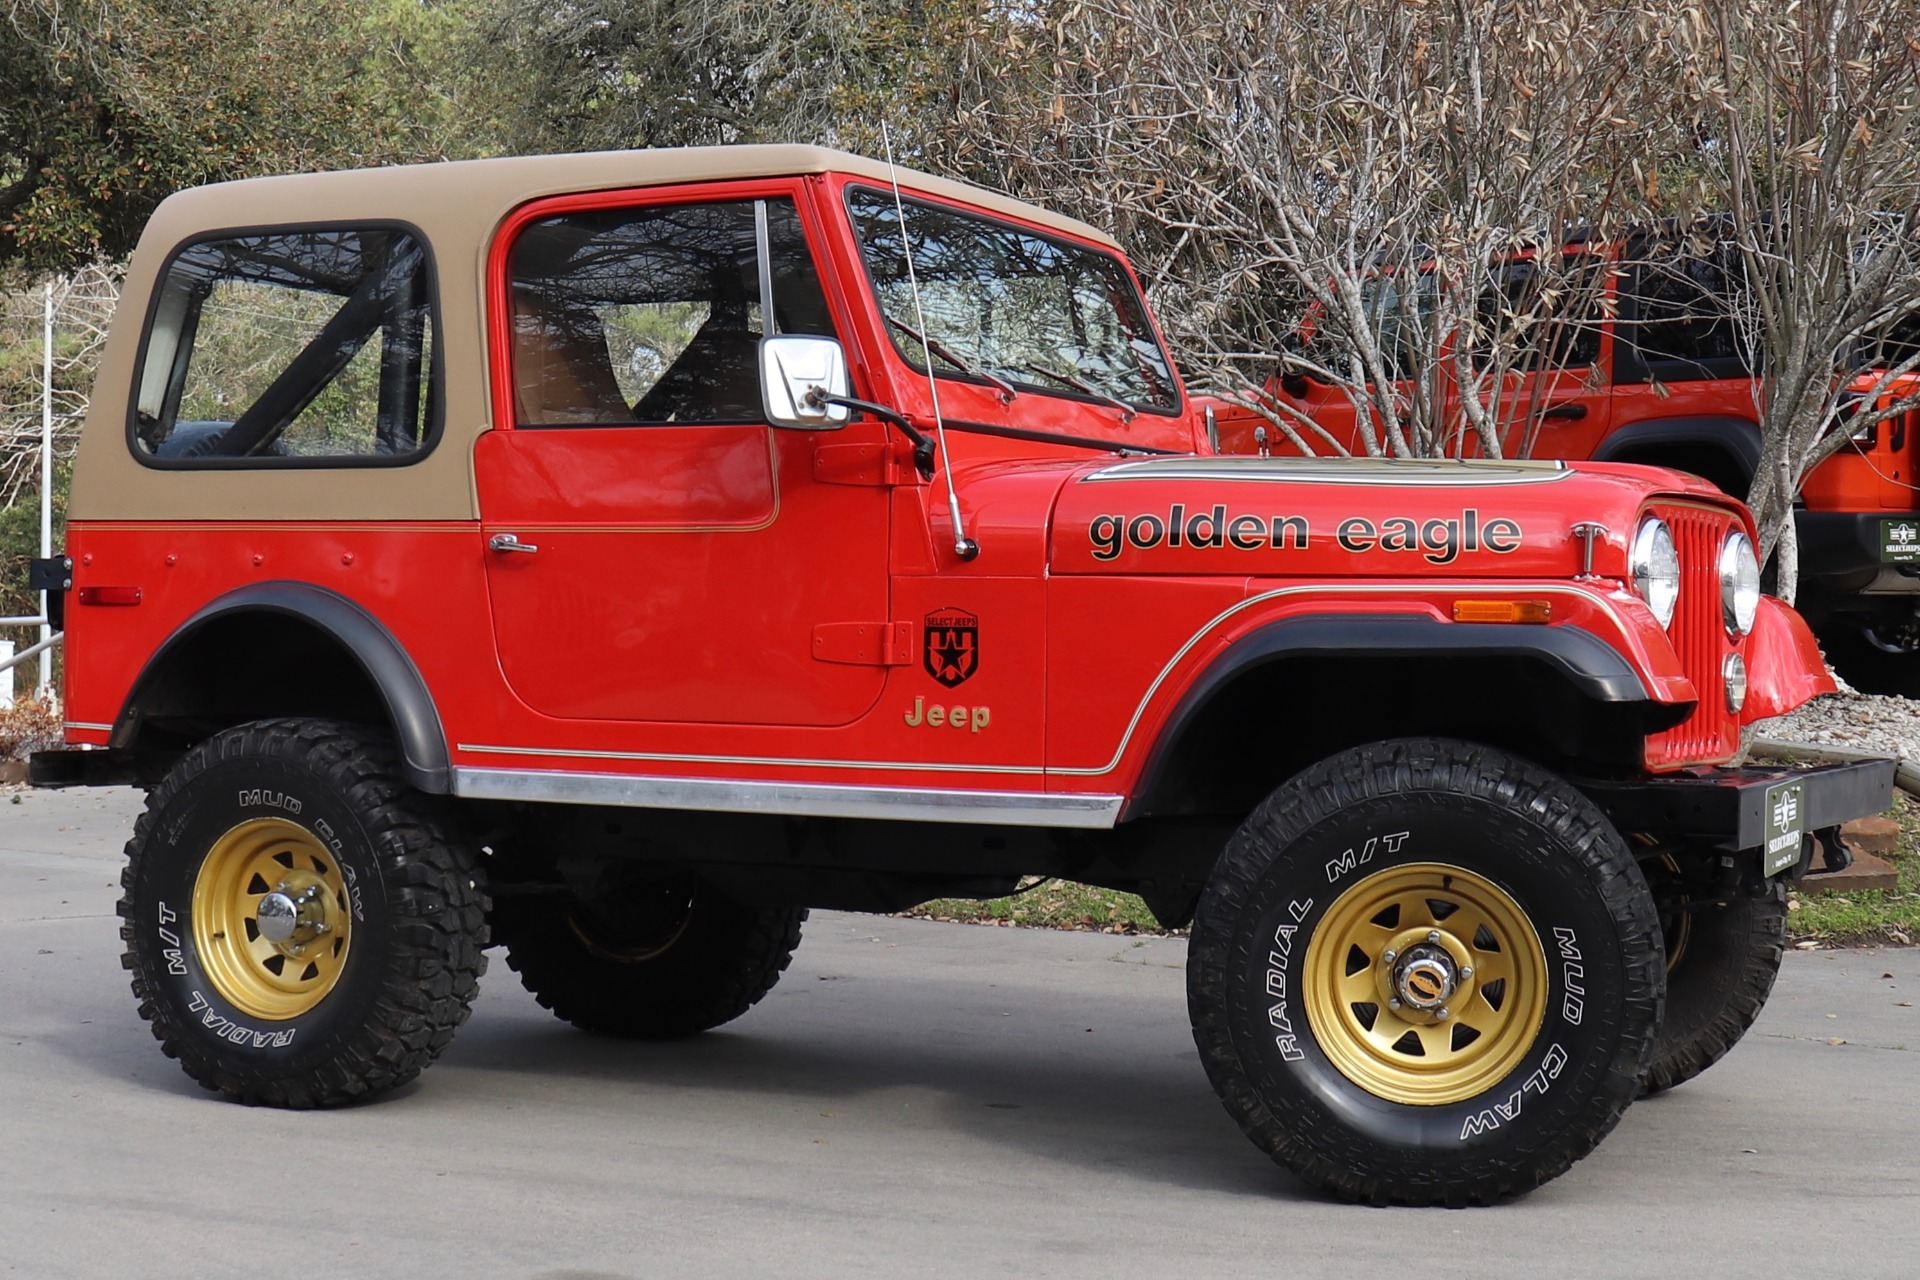 Used 1979 Jeep CJ-7 Golden Eagle For Sale ($27,995) | Select Jeeps Inc.  Stock #C045885